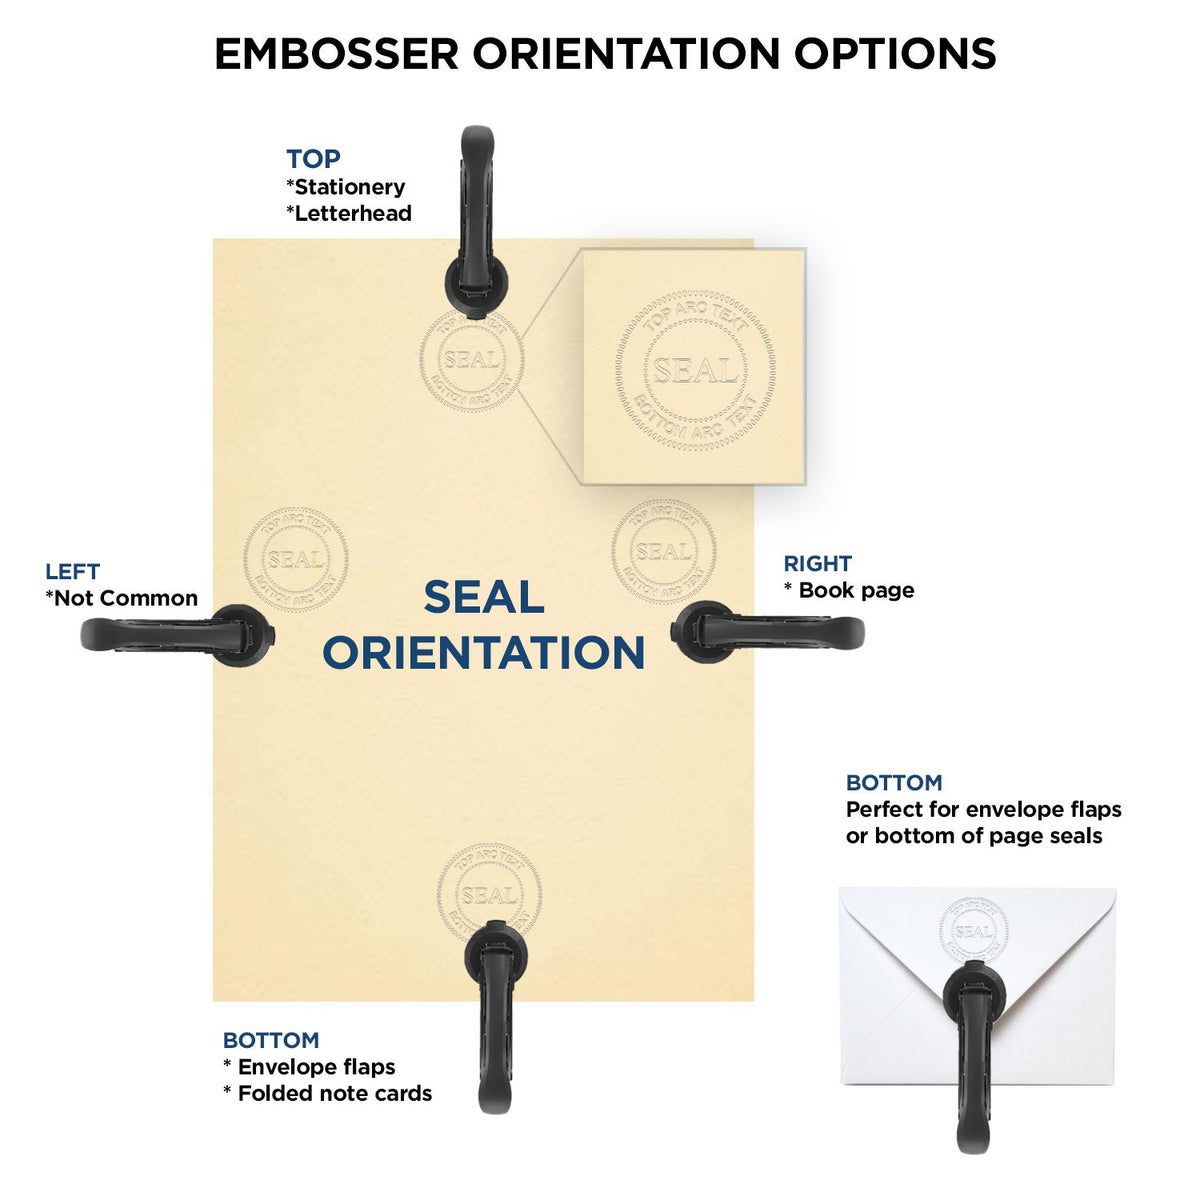 An infographic for the State of Maryland Extended Long Reach Engineer Seal showing embosser orientation, this is showing examples of a top, bottom, right and left insert.